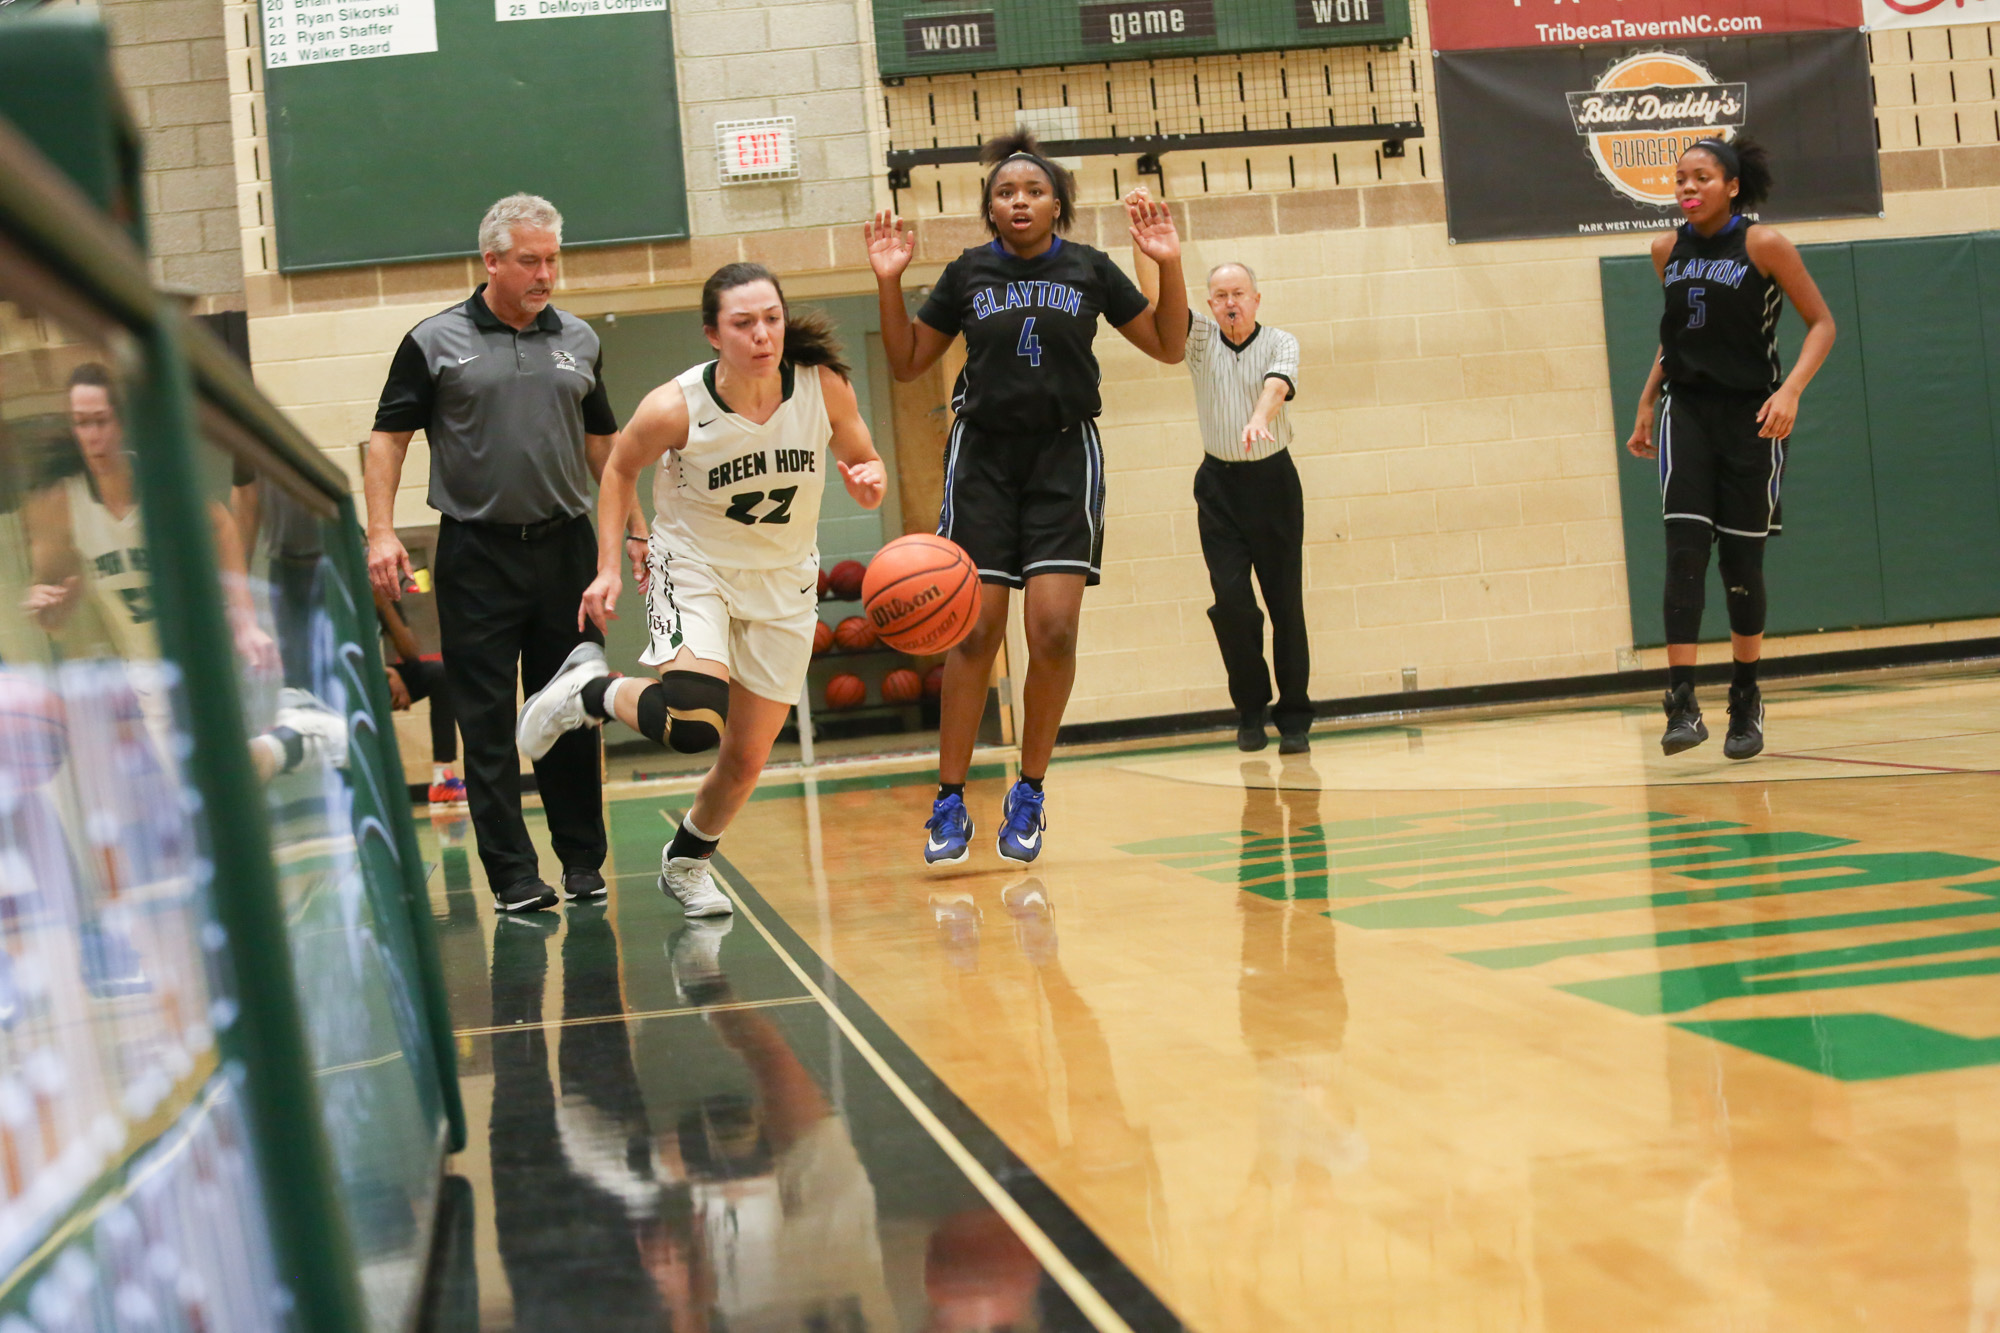  Clayton's No.4 player freezes at a moment worrying about the foul pushing Green Hope's Kelly Fetzgerald and the ball out of bounds during the second half of game on Feb.22, 2017. Green Hope won, 58-35. 